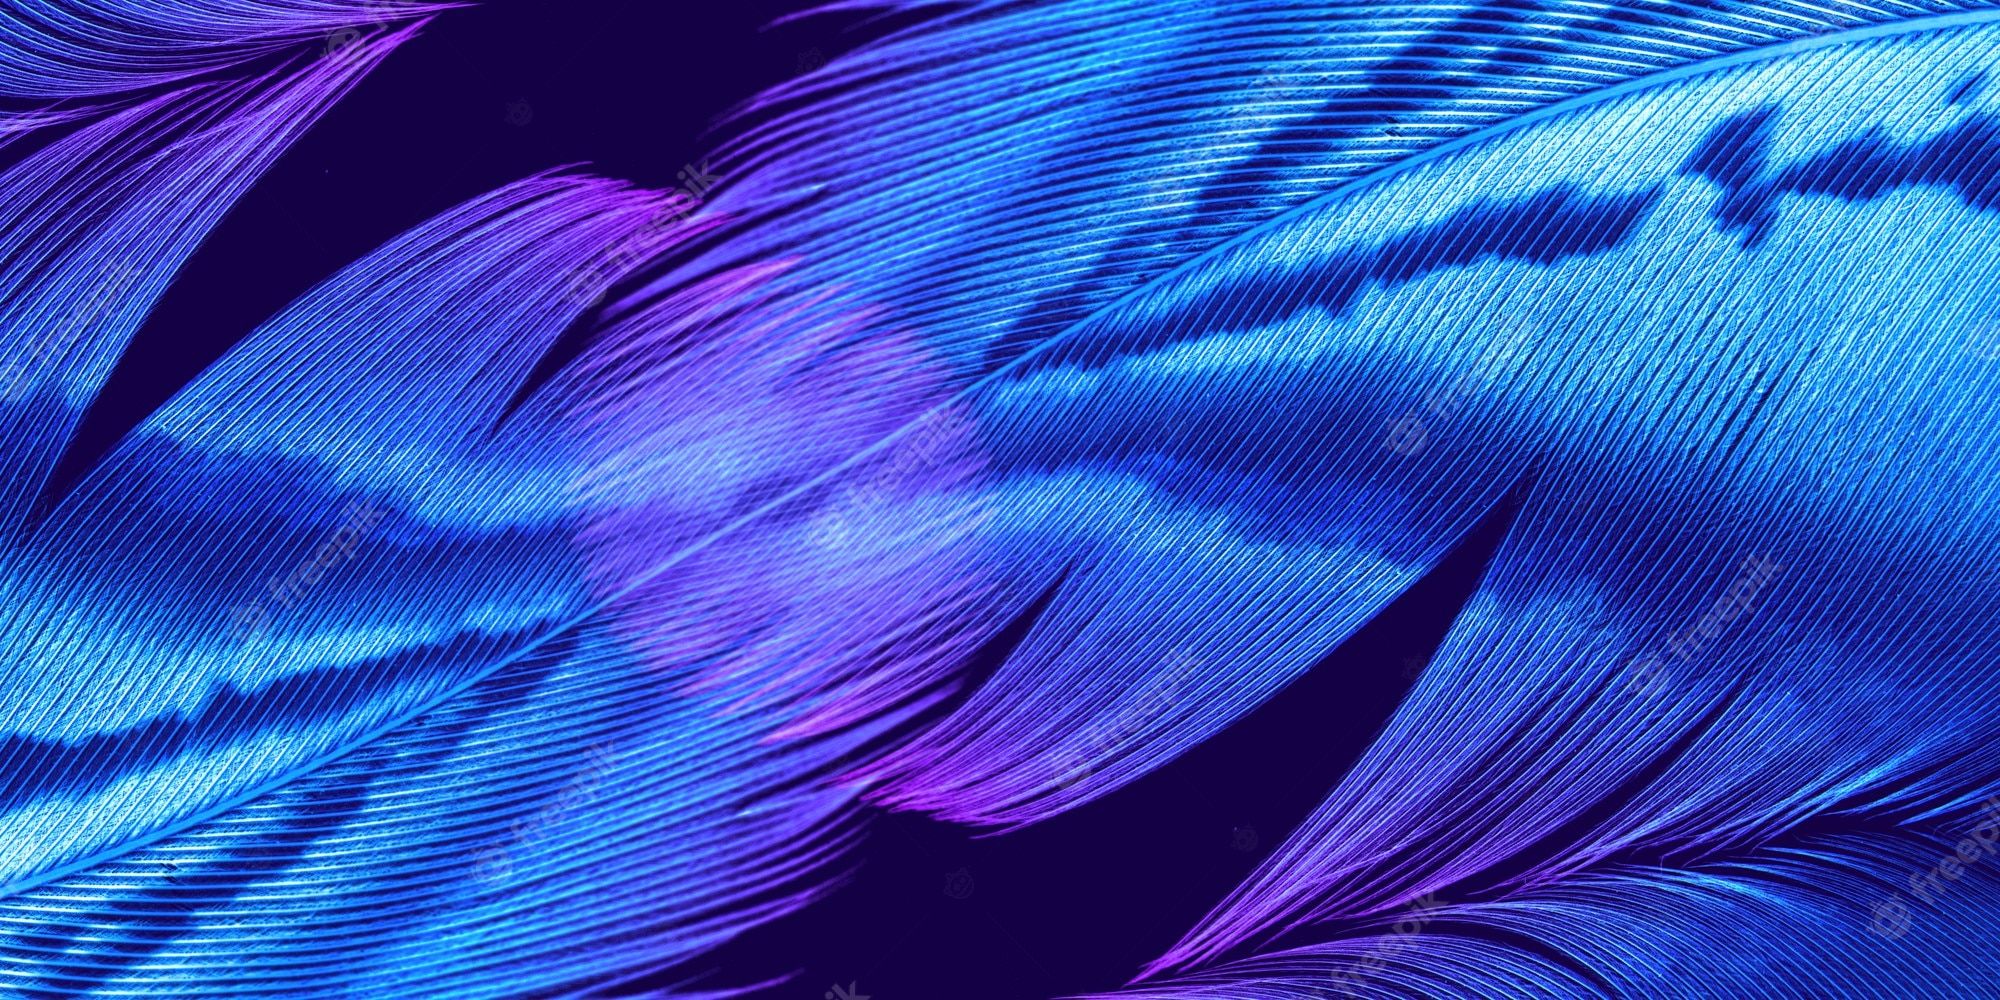 Blue and purple feathers on a black background - Dark vaporwave